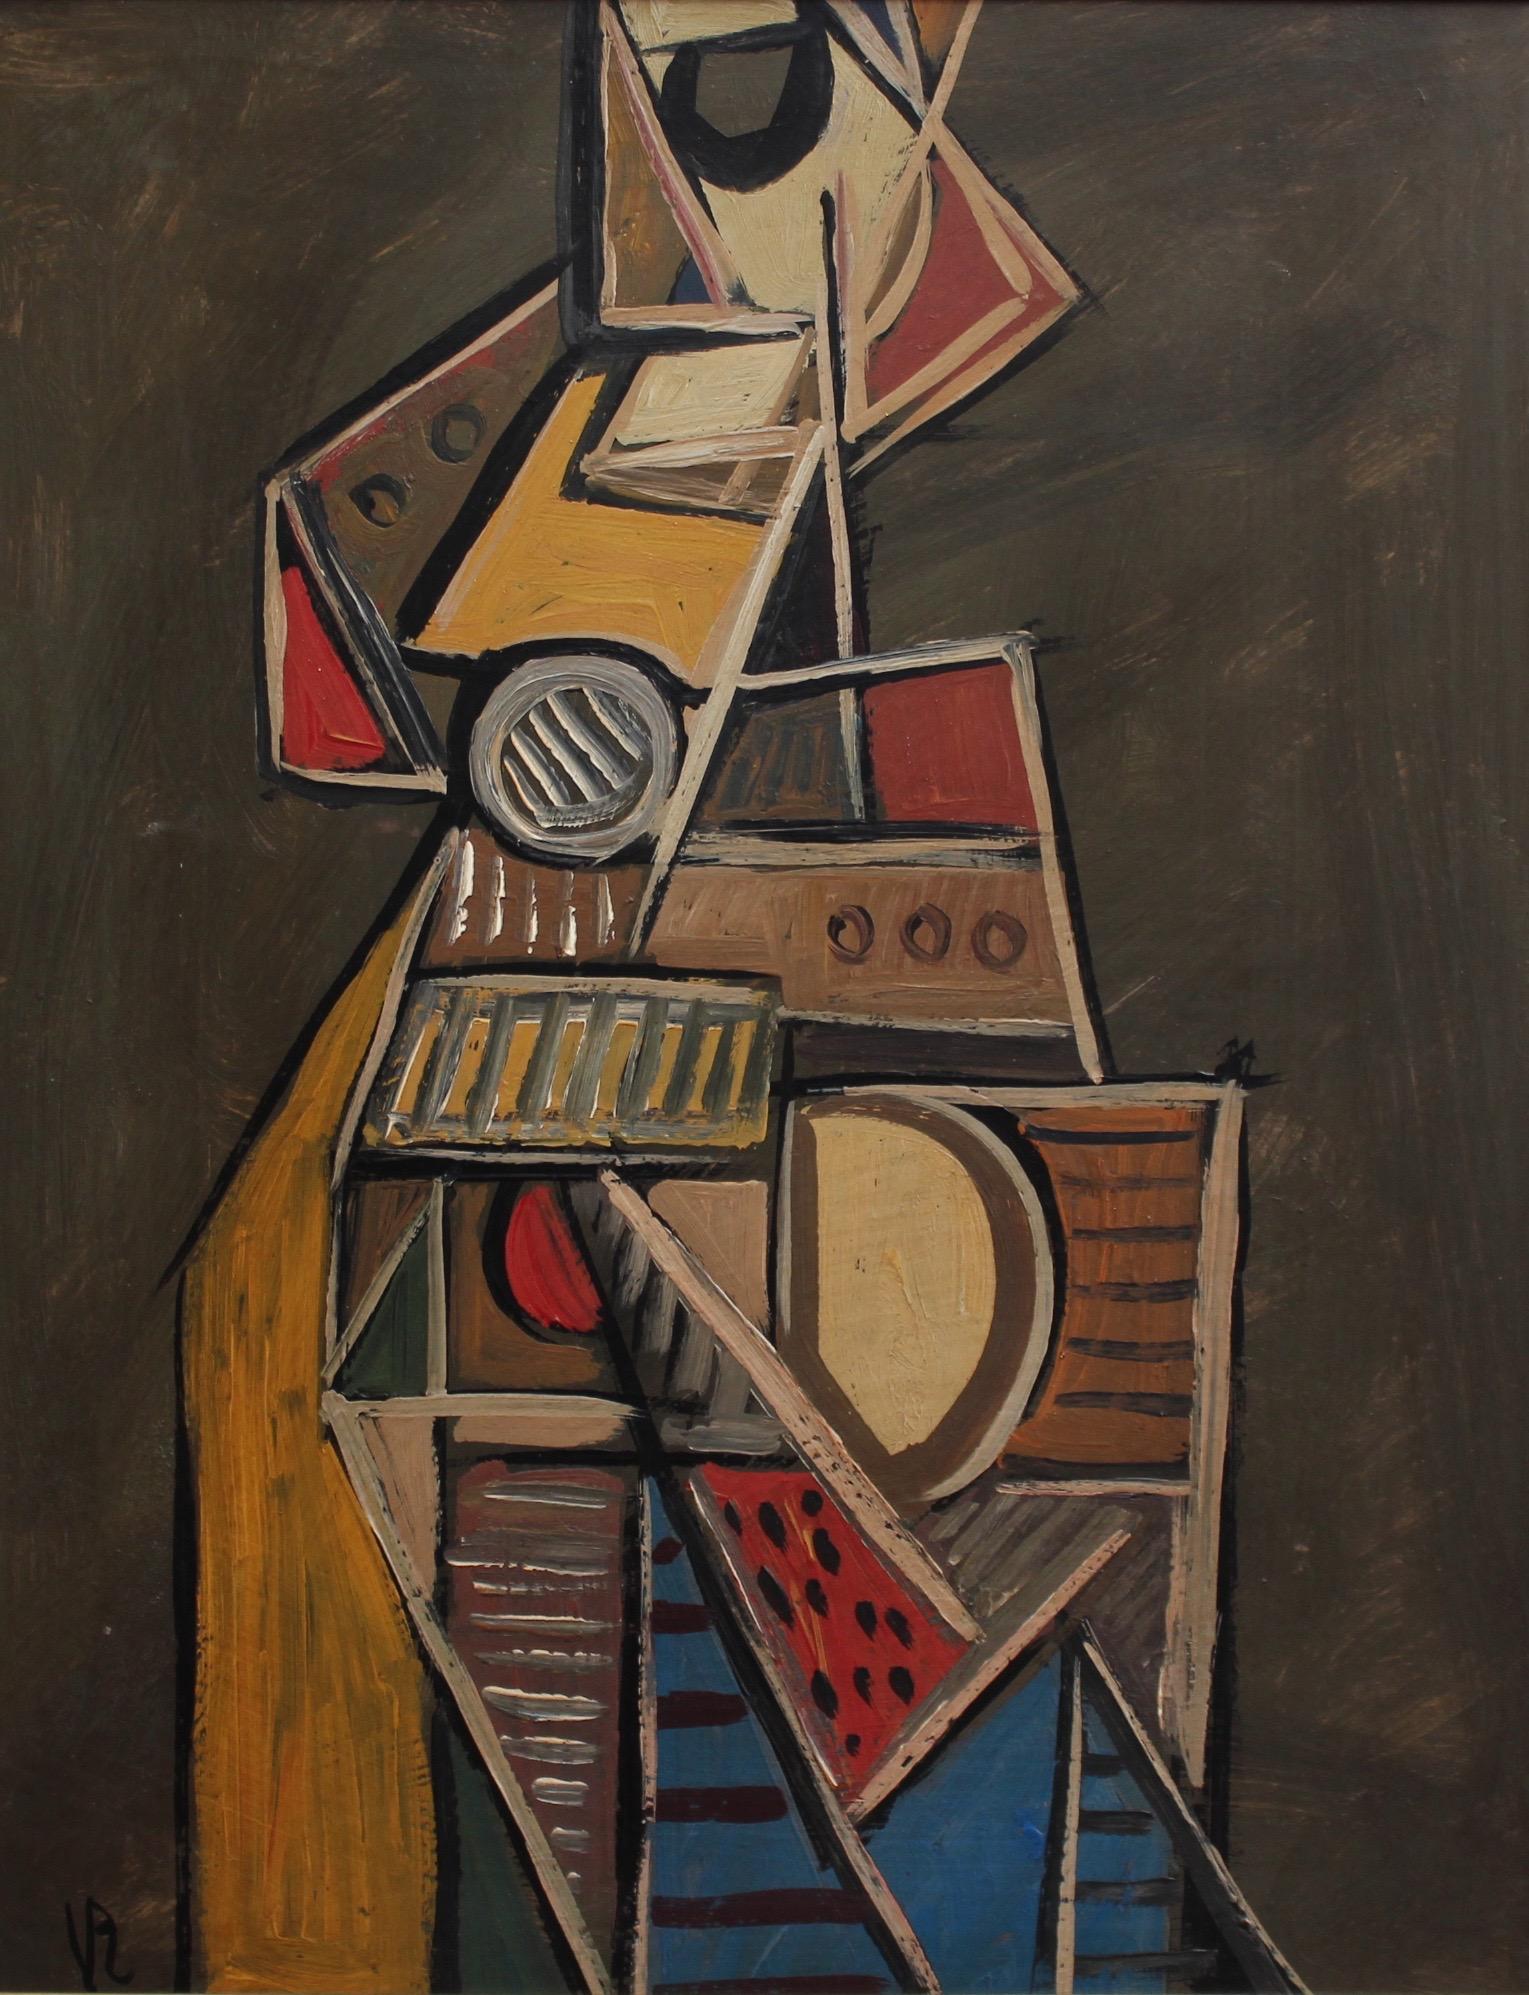 STM Abstract Painting - 'Cubist Instrumentalist' by V.R., Mid-Century Abstract Oil Painting, Berlin